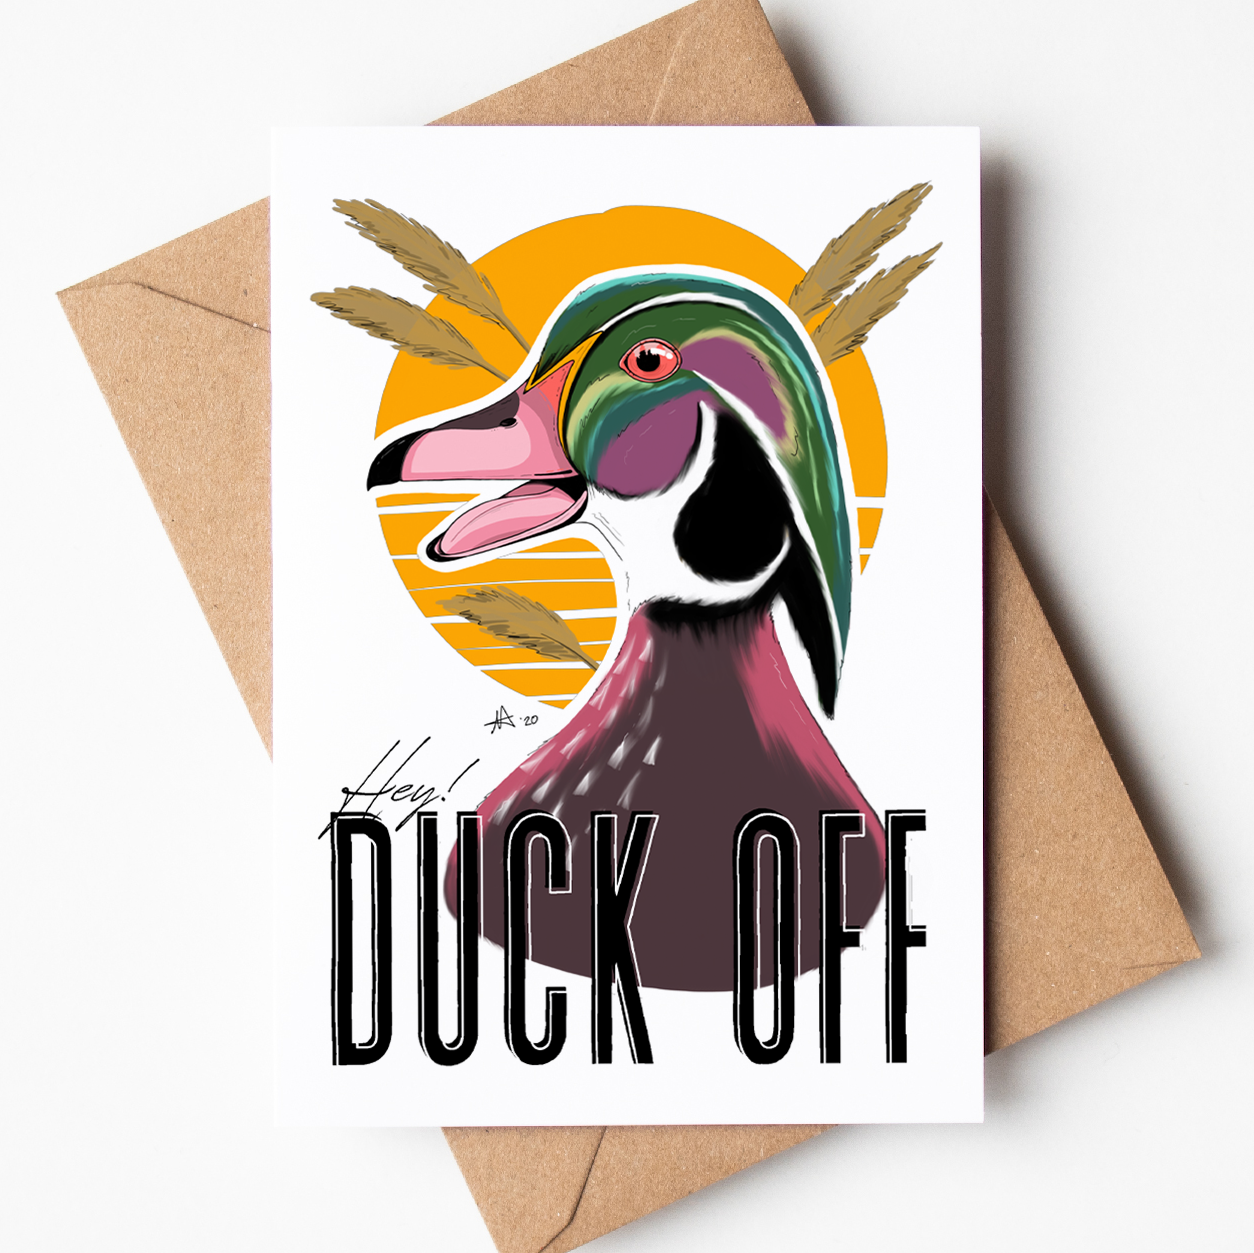 "Hey, DUCK OFF" - Greeting Card